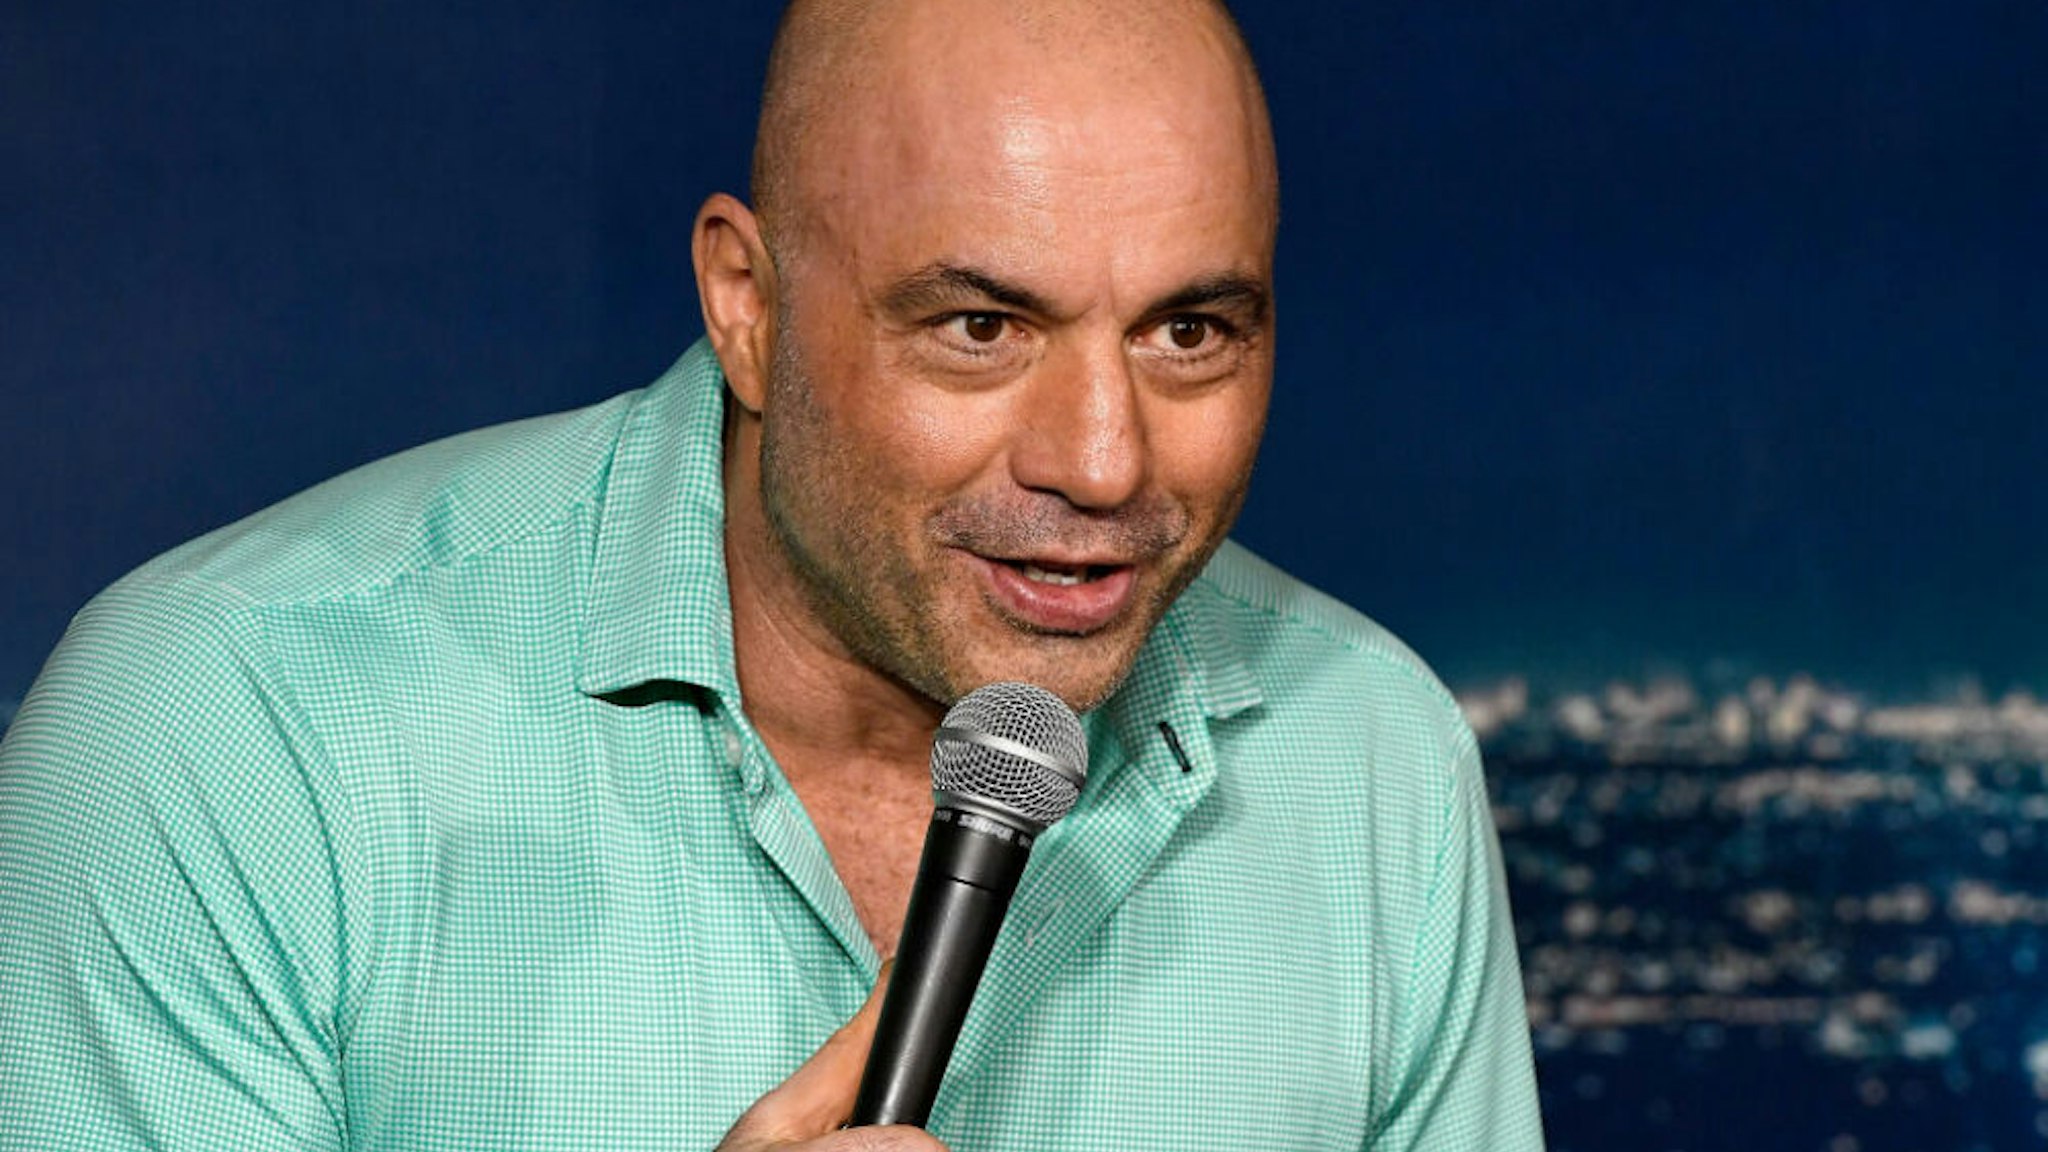 PASADENA, CA - MARCH 15: Comedian Joe Rogan performs during his appearance at The Ice House Comedy Club on March 15, 2019 in Pasadena, California.